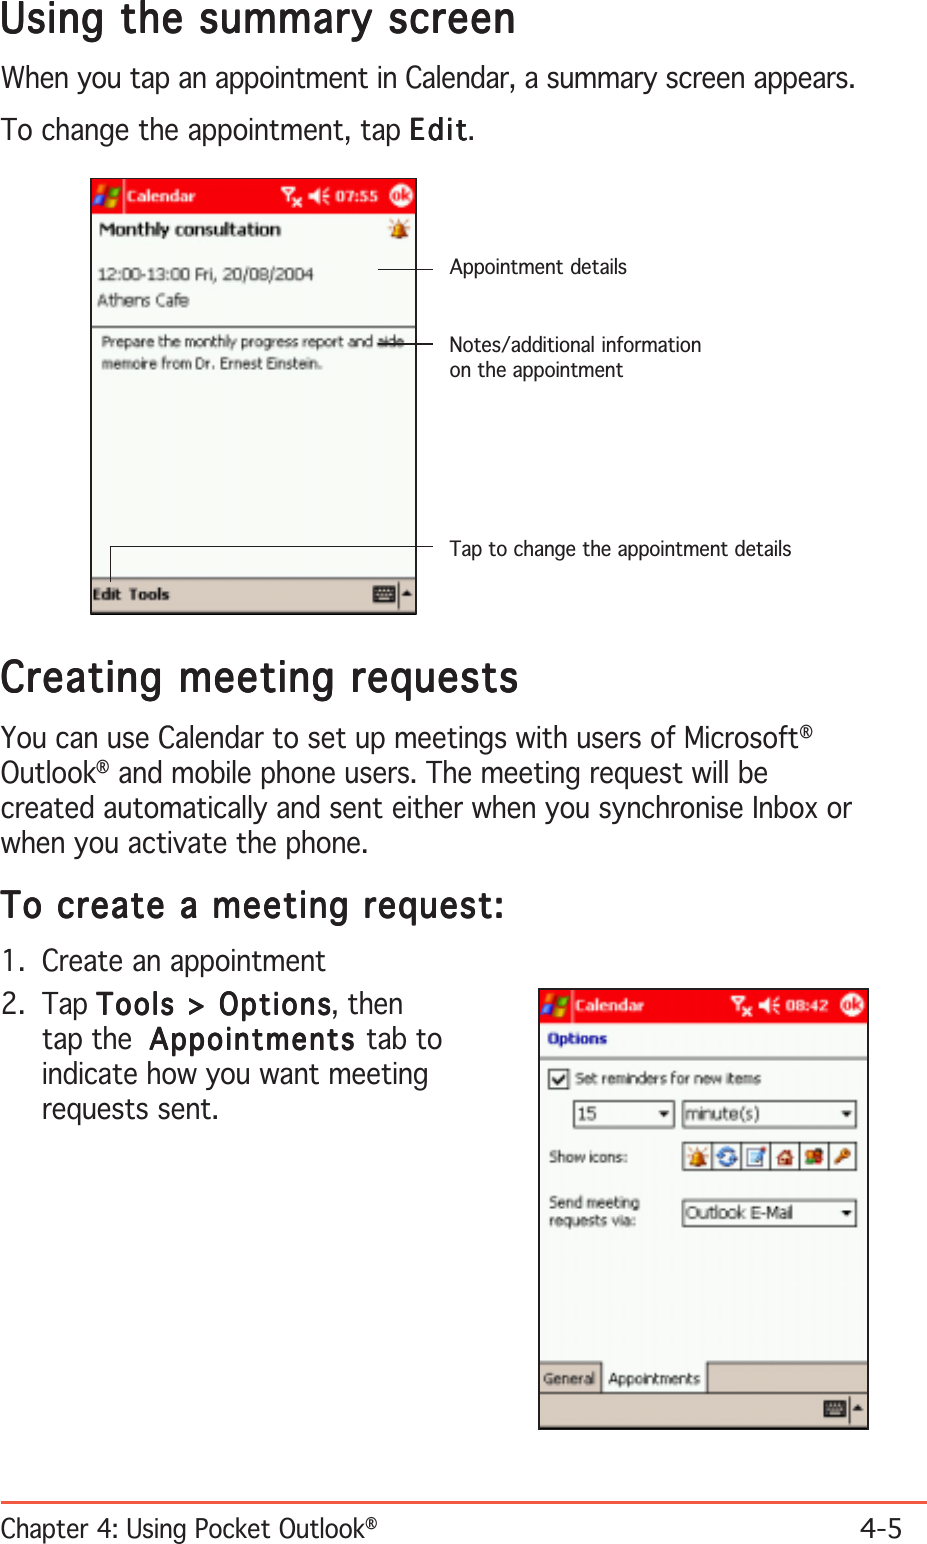 Chapter 4: Using Pocket Outlook®4-5Using the summary screenUsing the summary screenUsing the summary screenUsing the summary screenUsing the summary screenWhen you tap an appointment in Calendar, a summary screen appears.To change the appointment, tap EditEditEditEditEdit.Creating meeting requestsCreating meeting requestsCreating meeting requestsCreating meeting requestsCreating meeting requestsYou can use Calendar to set up meetings with users of Microsoft®Outlook® and mobile phone users. The meeting request will becreated automatically and sent either when you synchronise Inbox orwhen you activate the phone.To create a meeting request:To create a meeting request:To create a meeting request:To create a meeting request:To create a meeting request:1. Create an appointment2. Tap Tools &gt; OptionsTools &gt; OptionsTools &gt; OptionsTools &gt; OptionsTools &gt; Options, thentap the AppointmentsAppointmentsAppointmentsAppointmentsAppointments tab toindicate how you want meetingrequests sent.Appointment detailsNotes/additional informationon the appointmentTap to change the appointment details